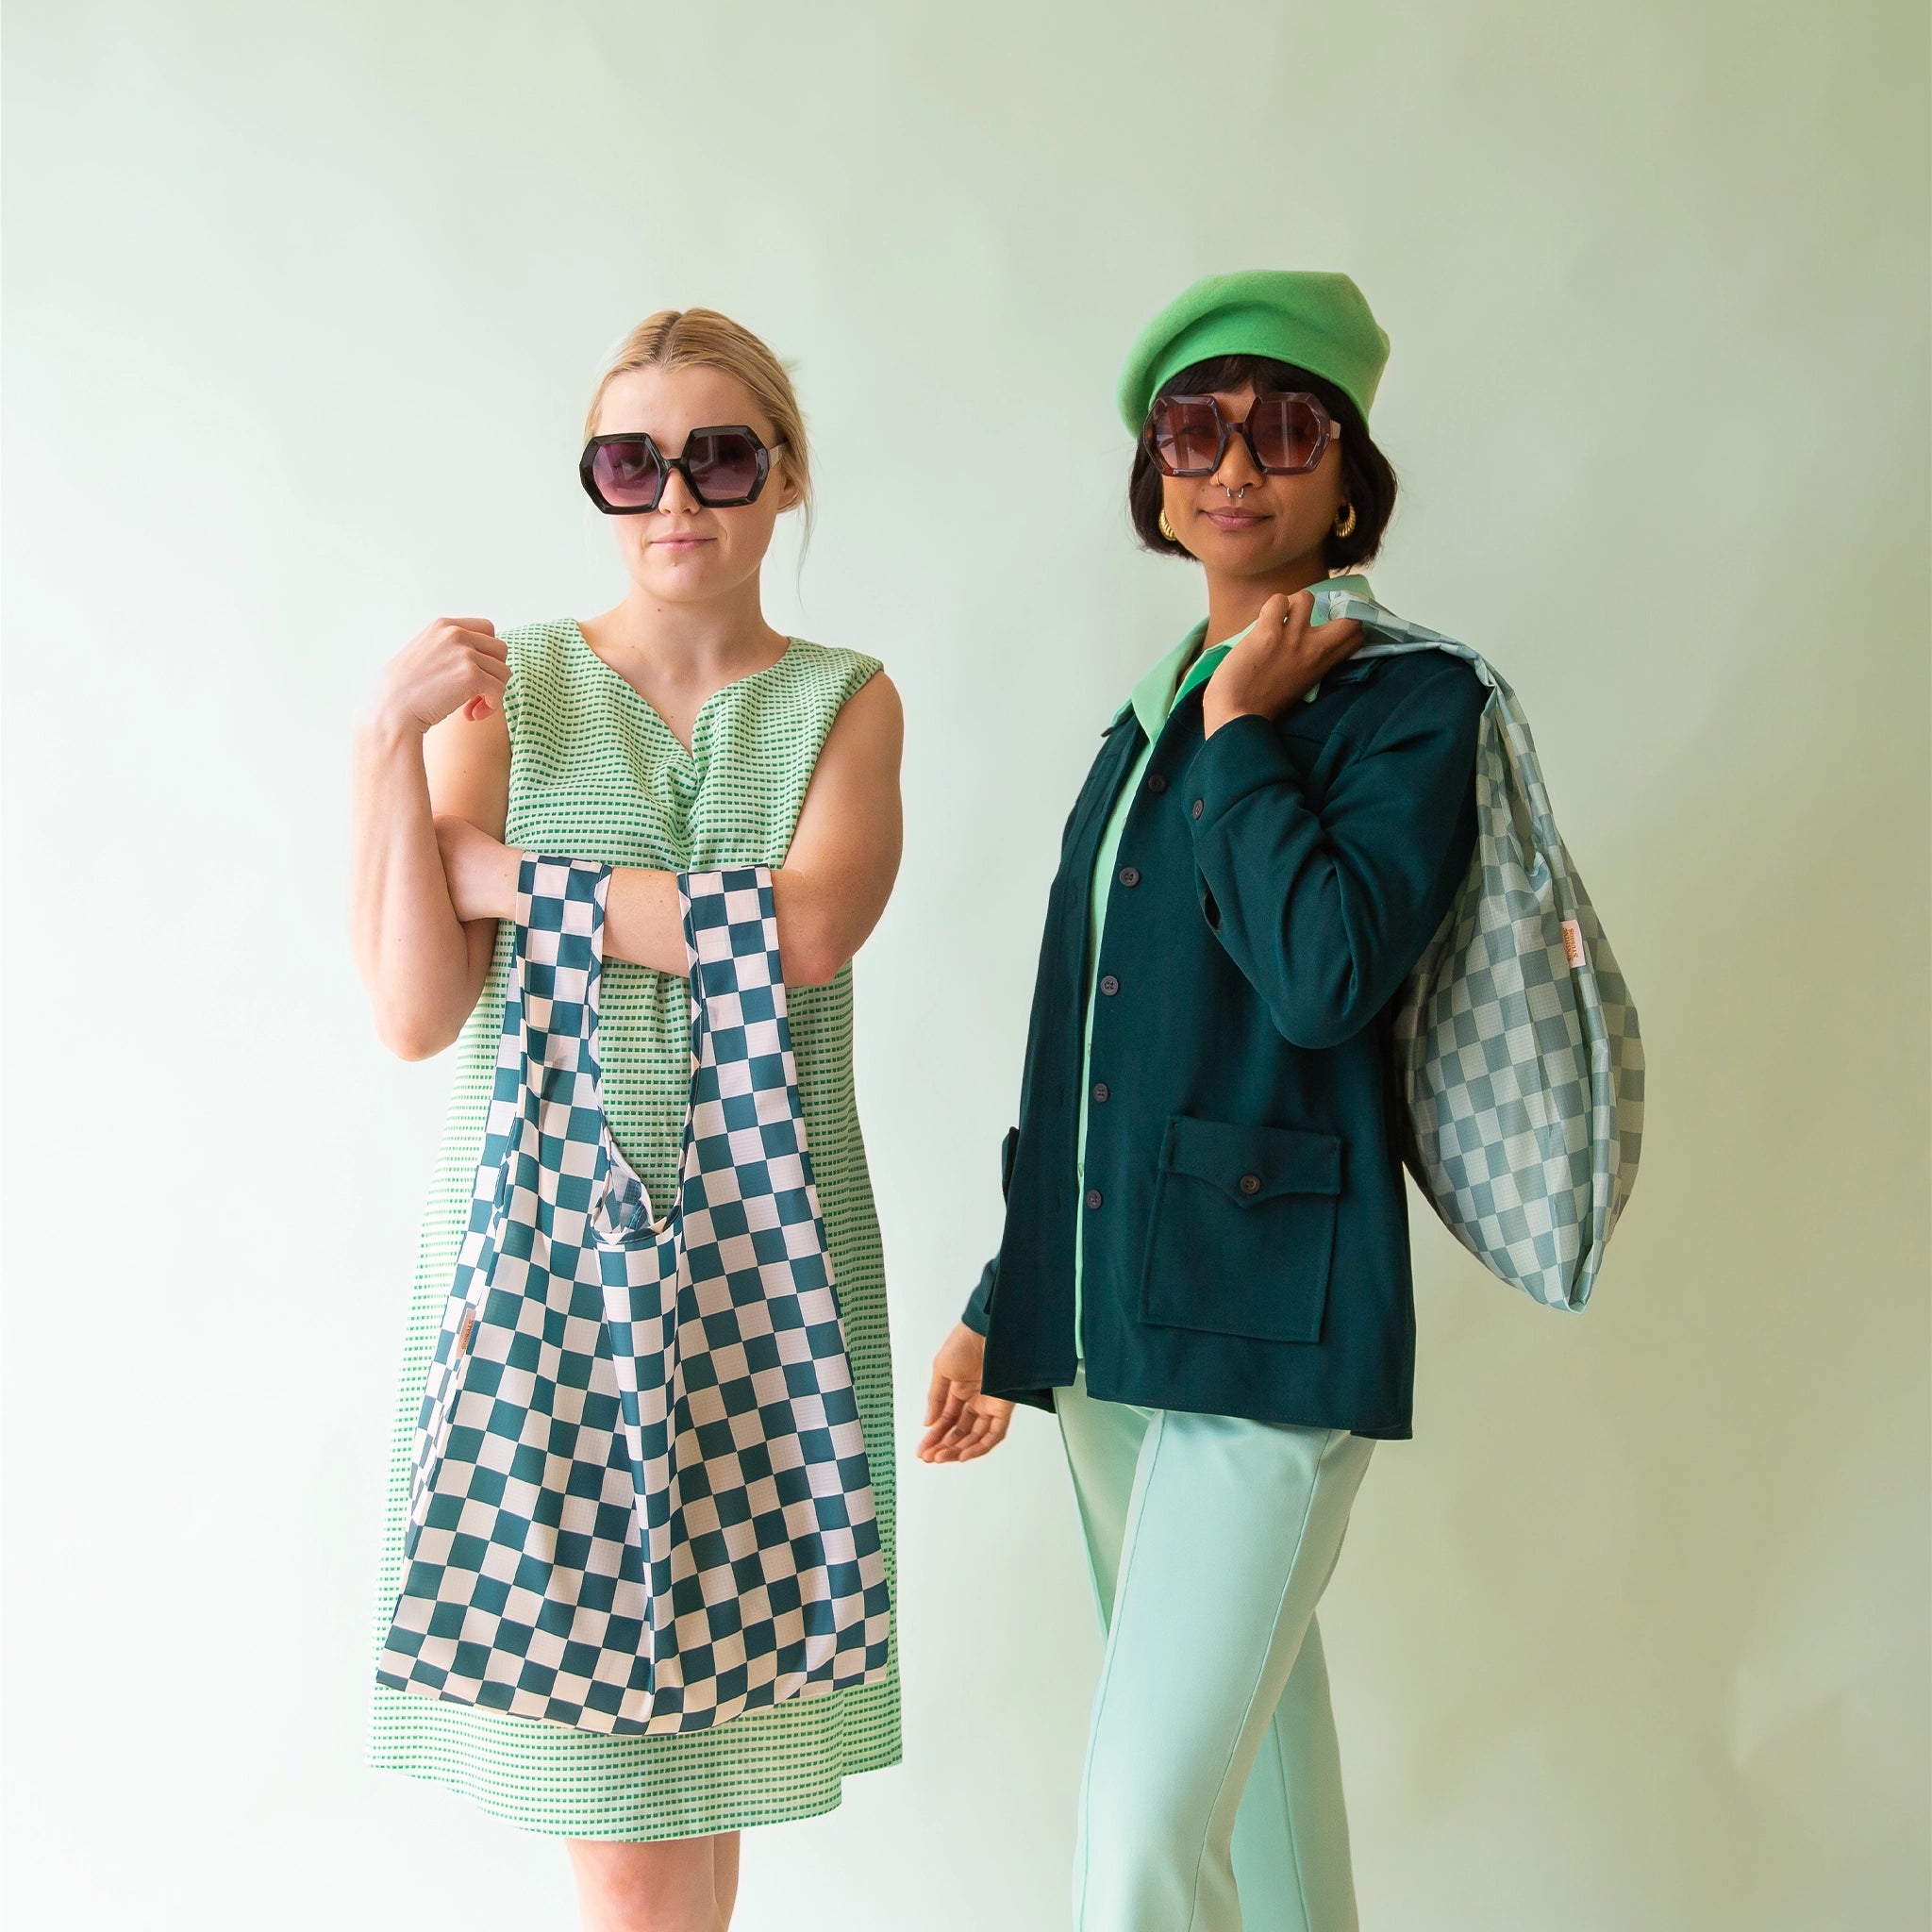 On a light blue background is a model holding a turquoise and light blue checkered print nylon bag next to another model holding our reusable bag in the shade Aquamarine.